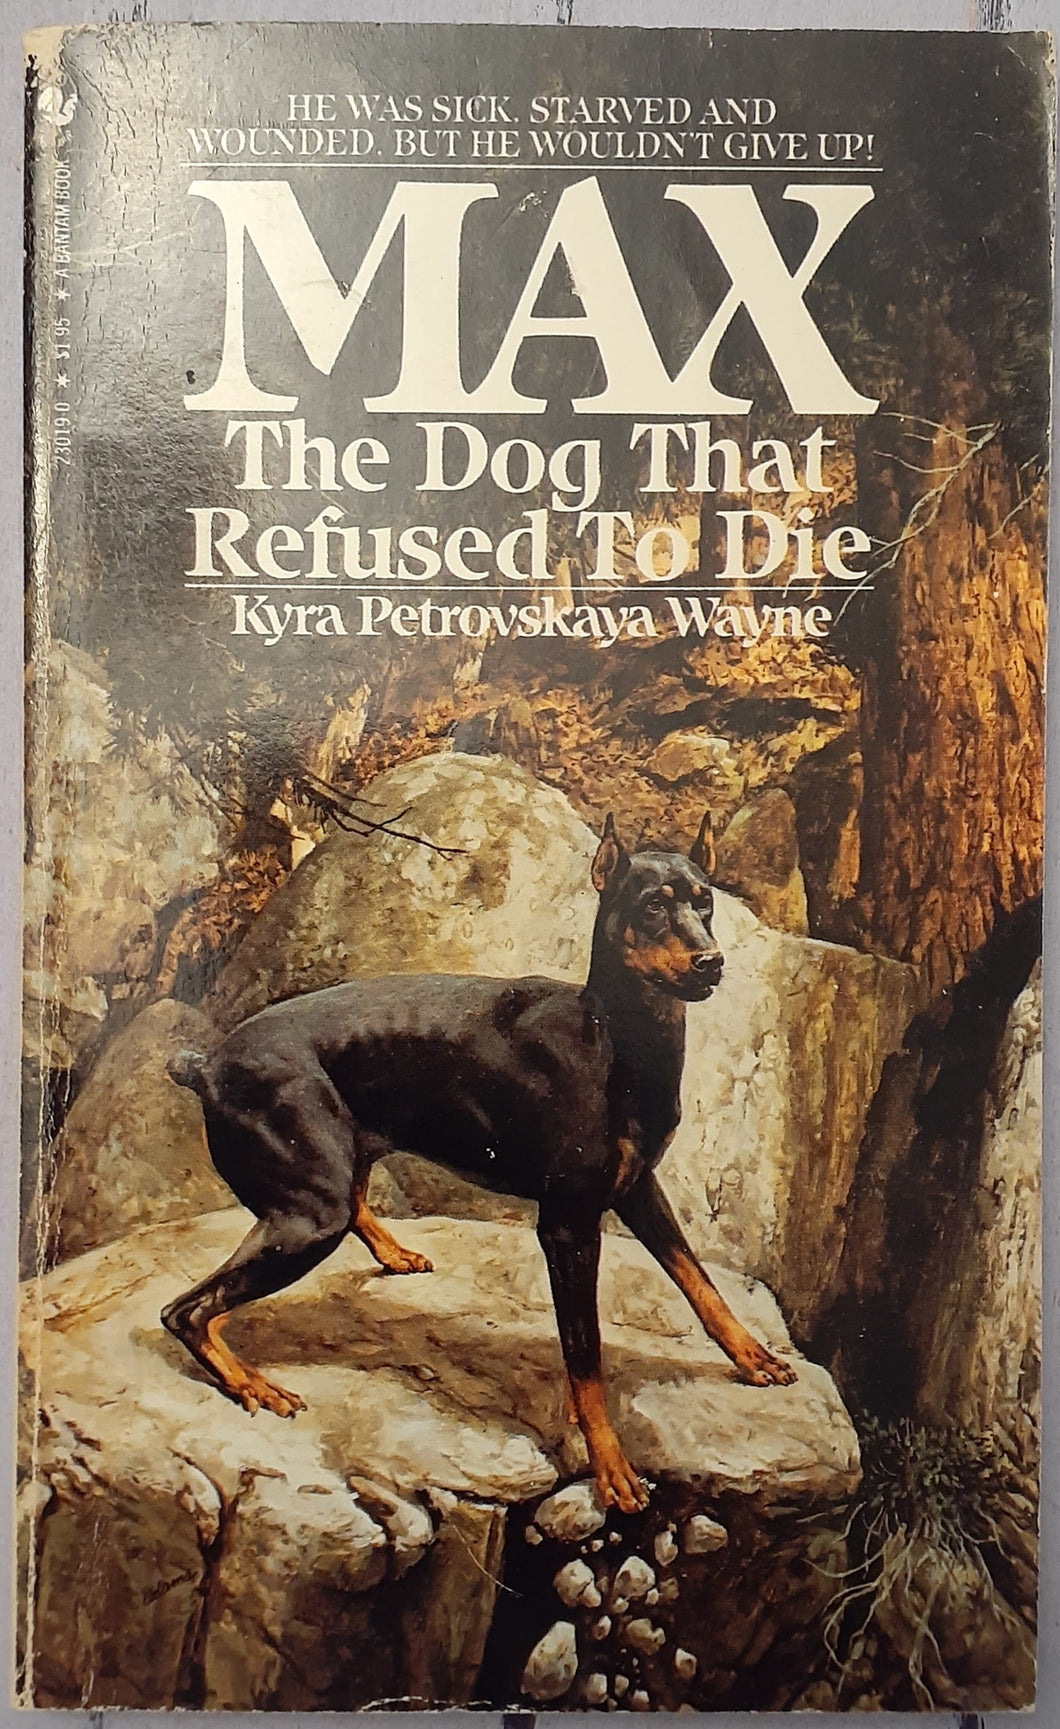 Max, the Dog That Refused to Die